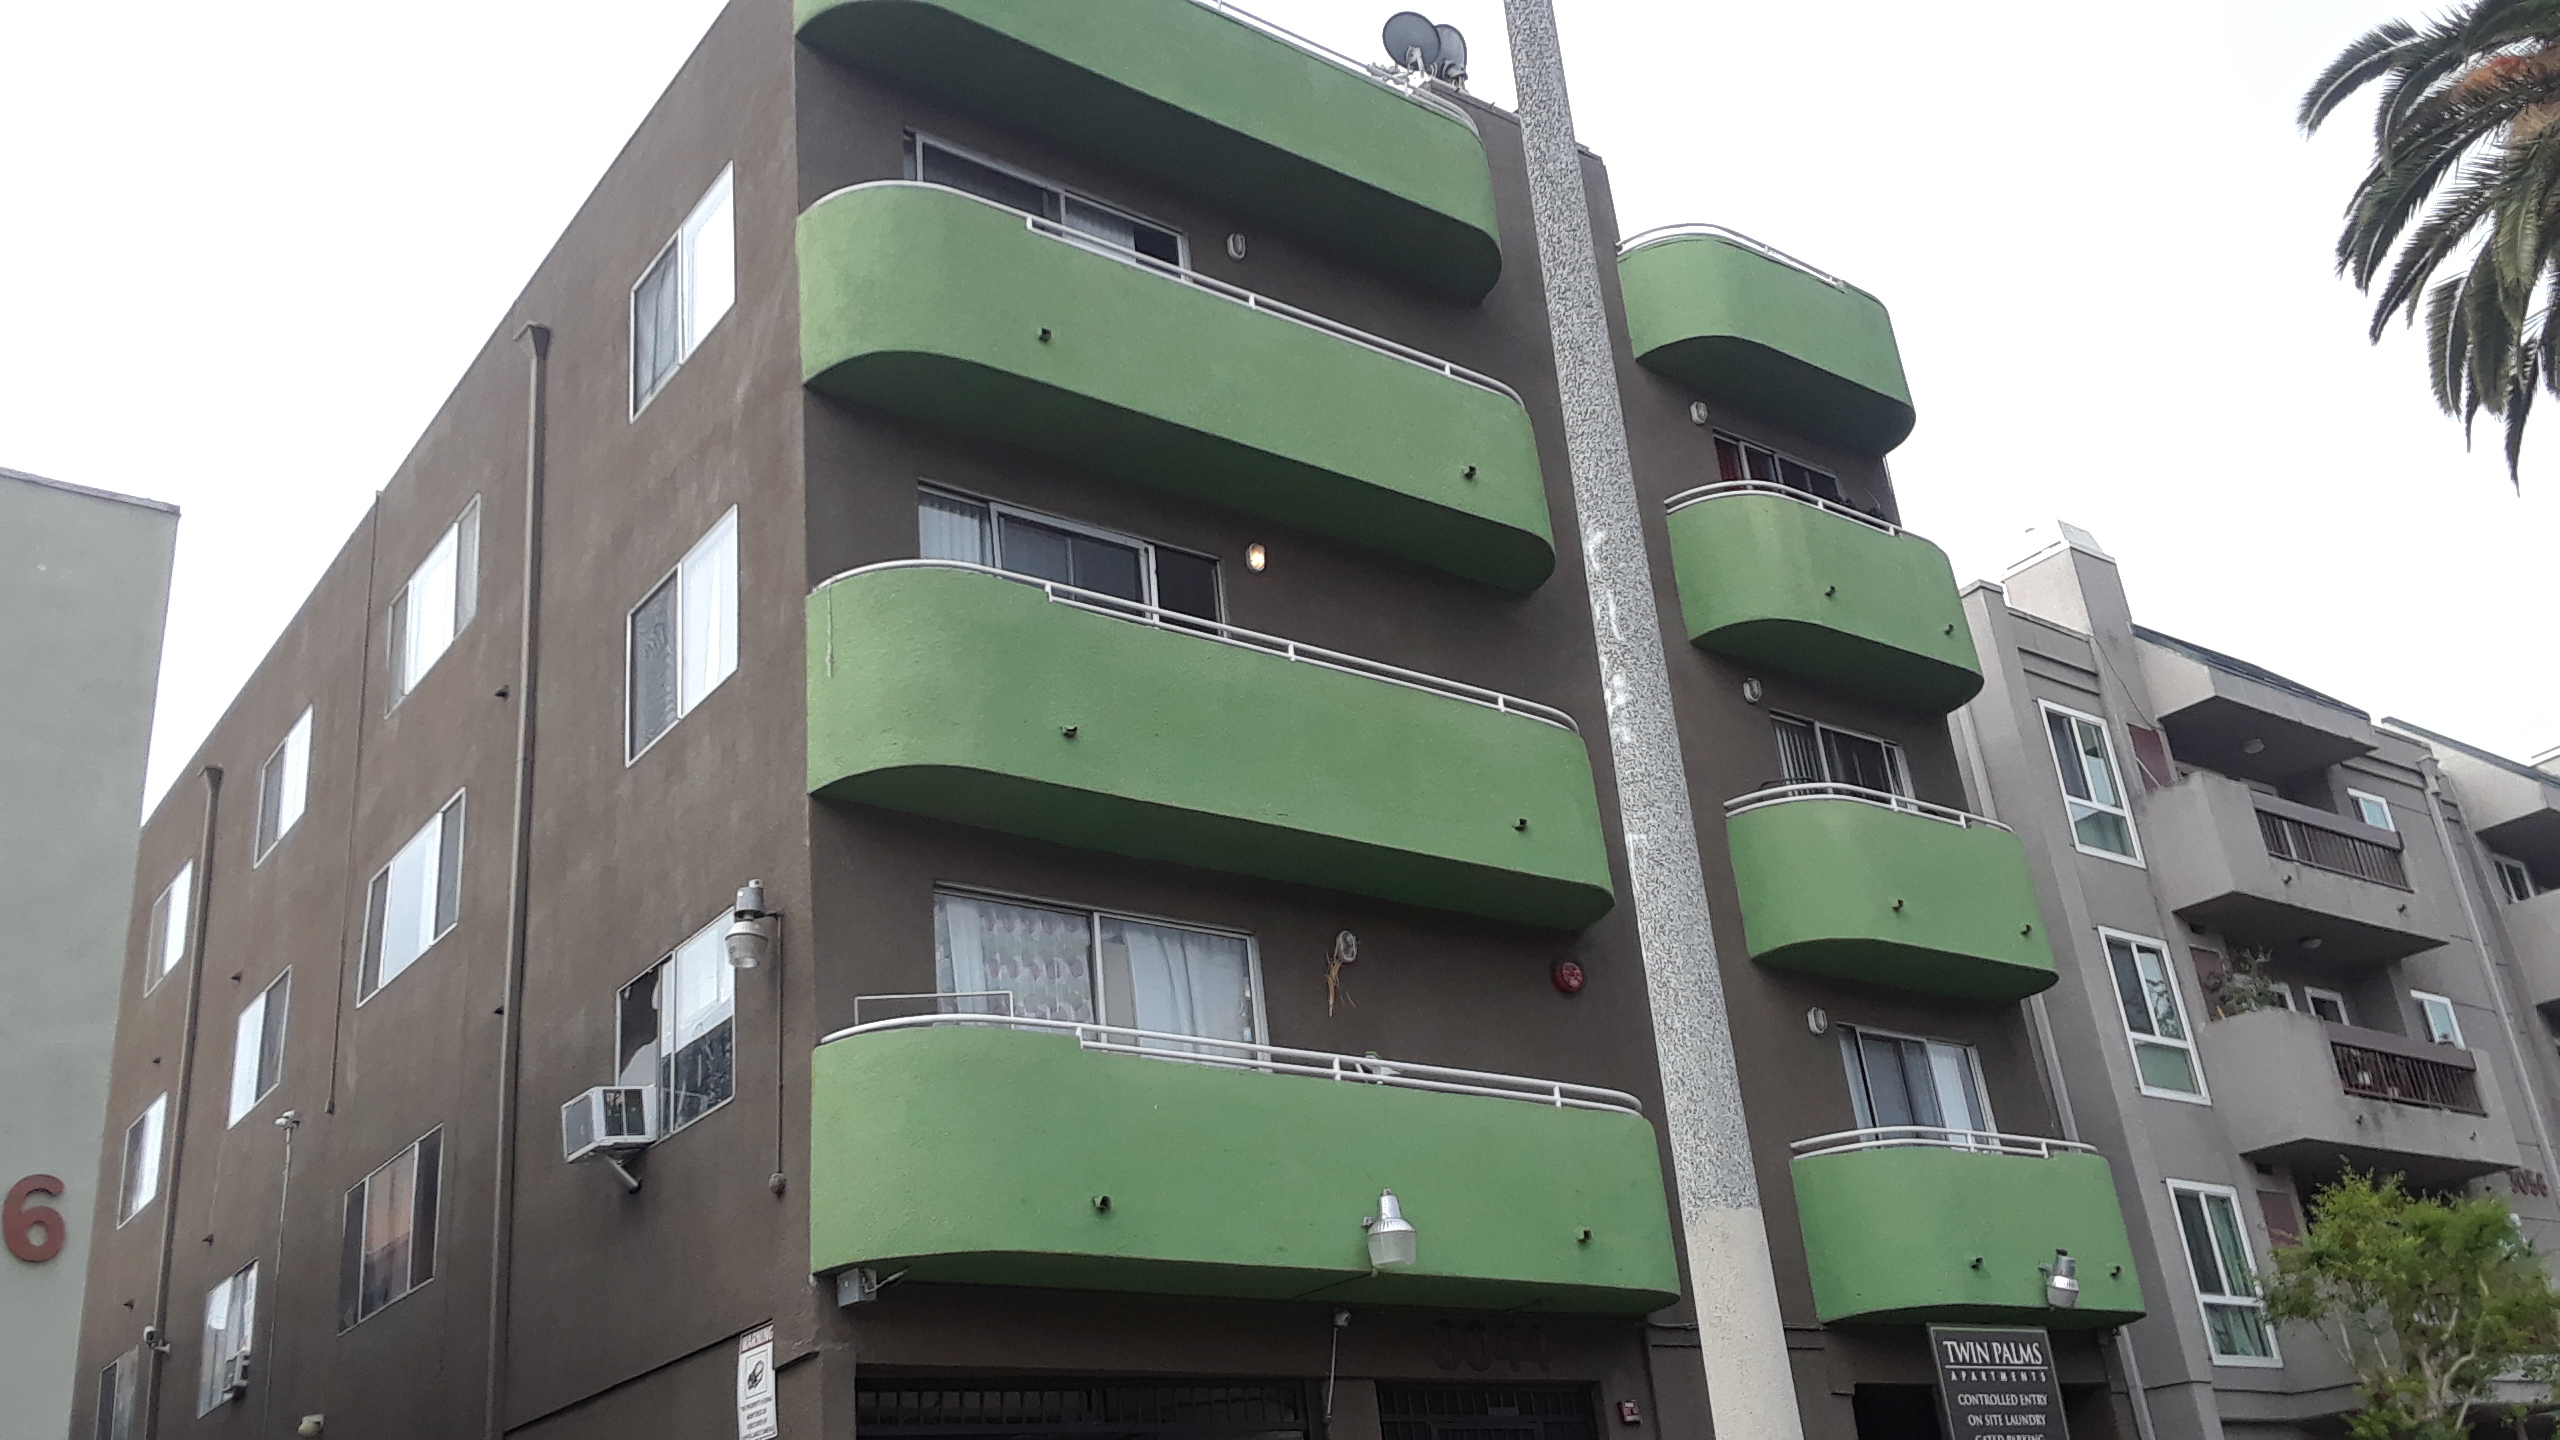 Front angle view of a four story building. Units facing the street have green balconies. The fronds of a very tall date palm on the sidewalk are just visible.